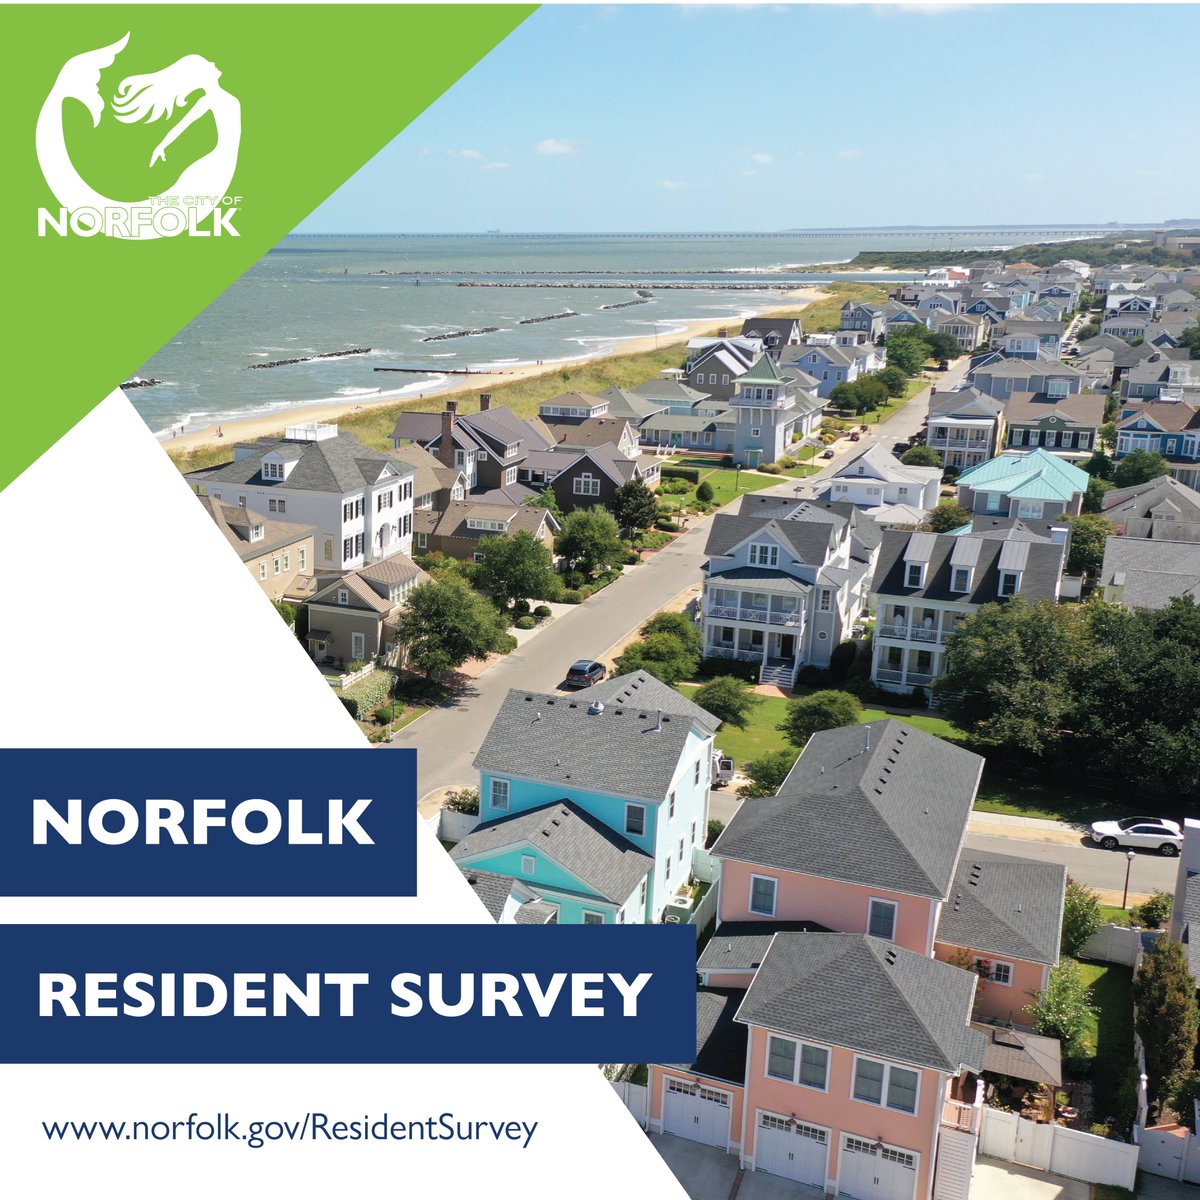 We're working with @etcinstitute to get resident feedback on programs, services & quality of life in Norfolk.

Before the survey opens to all residents in early June, some residents will receive a survey invitation in the mail in the coming weeks.
✅ norfolk.gov/ResidentSurvey